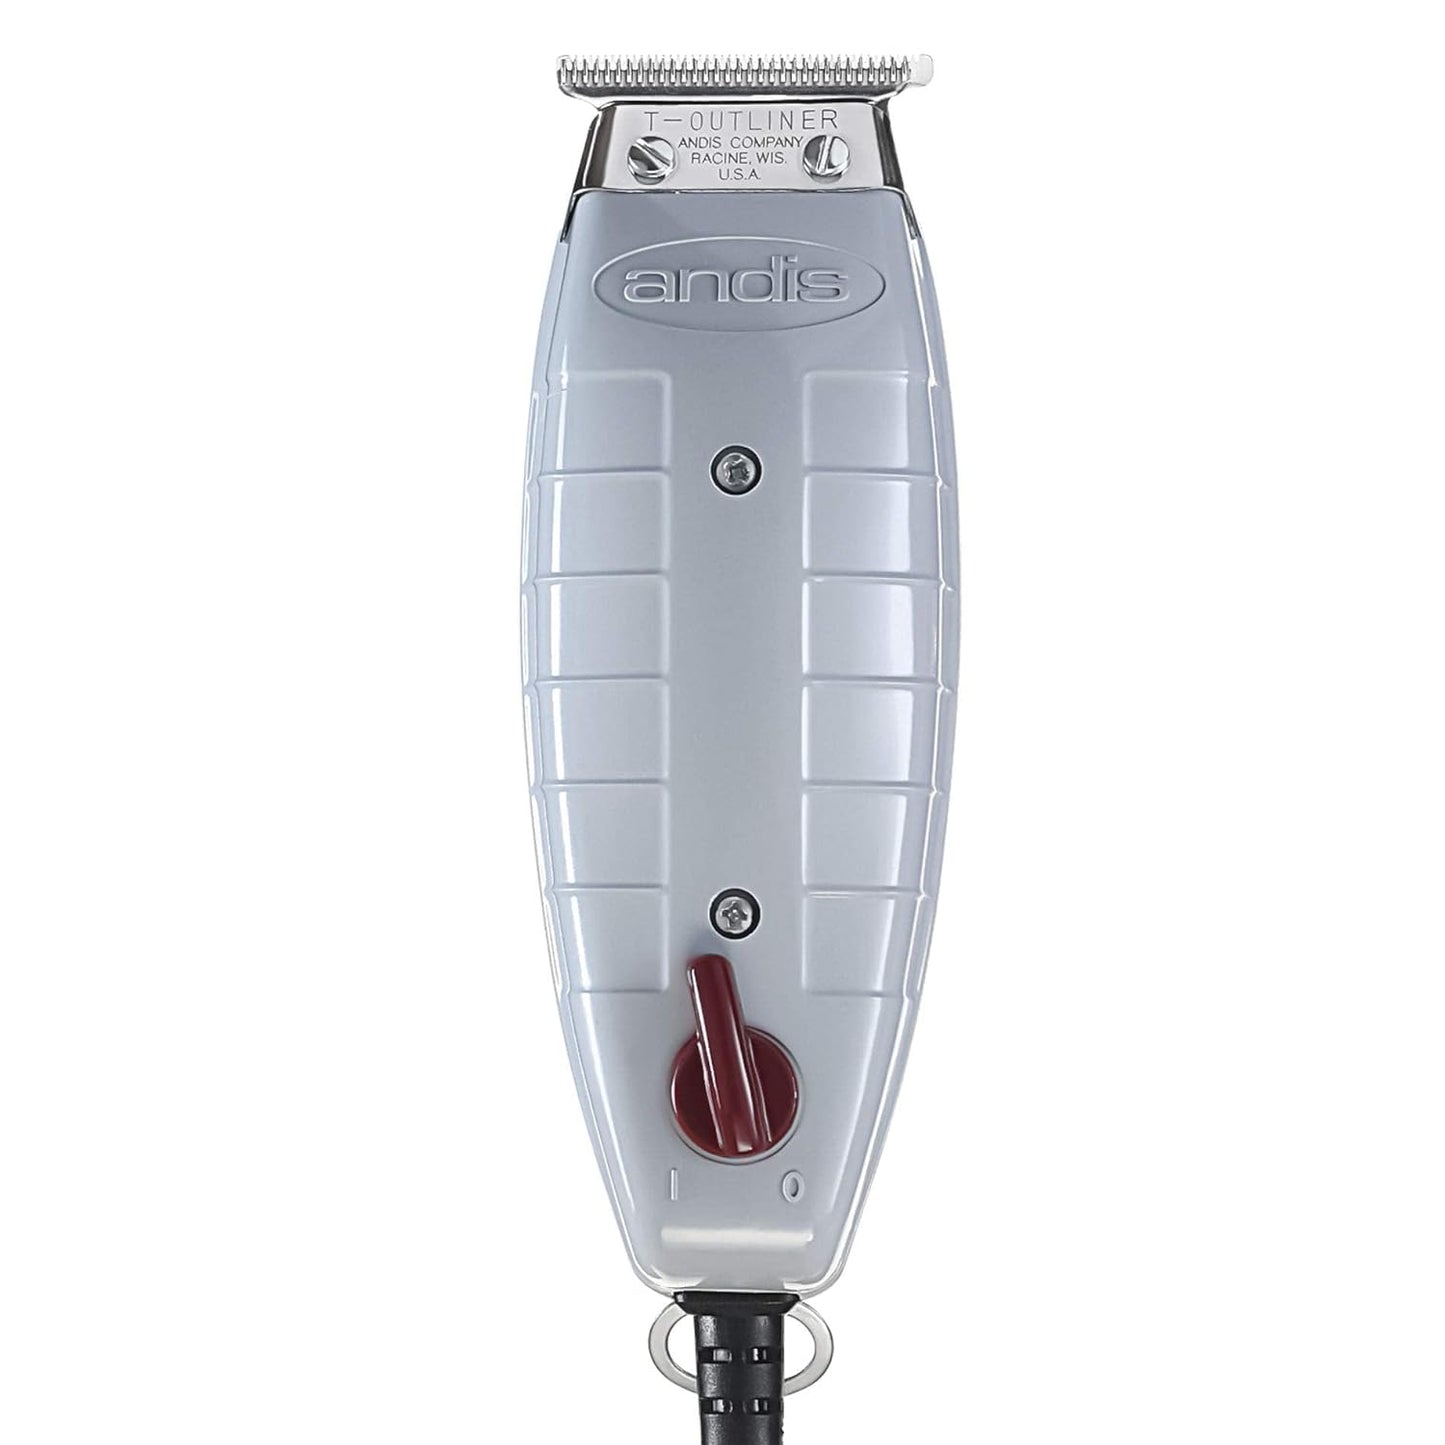 Andis 04710 Professional T-Outliner Trimmer